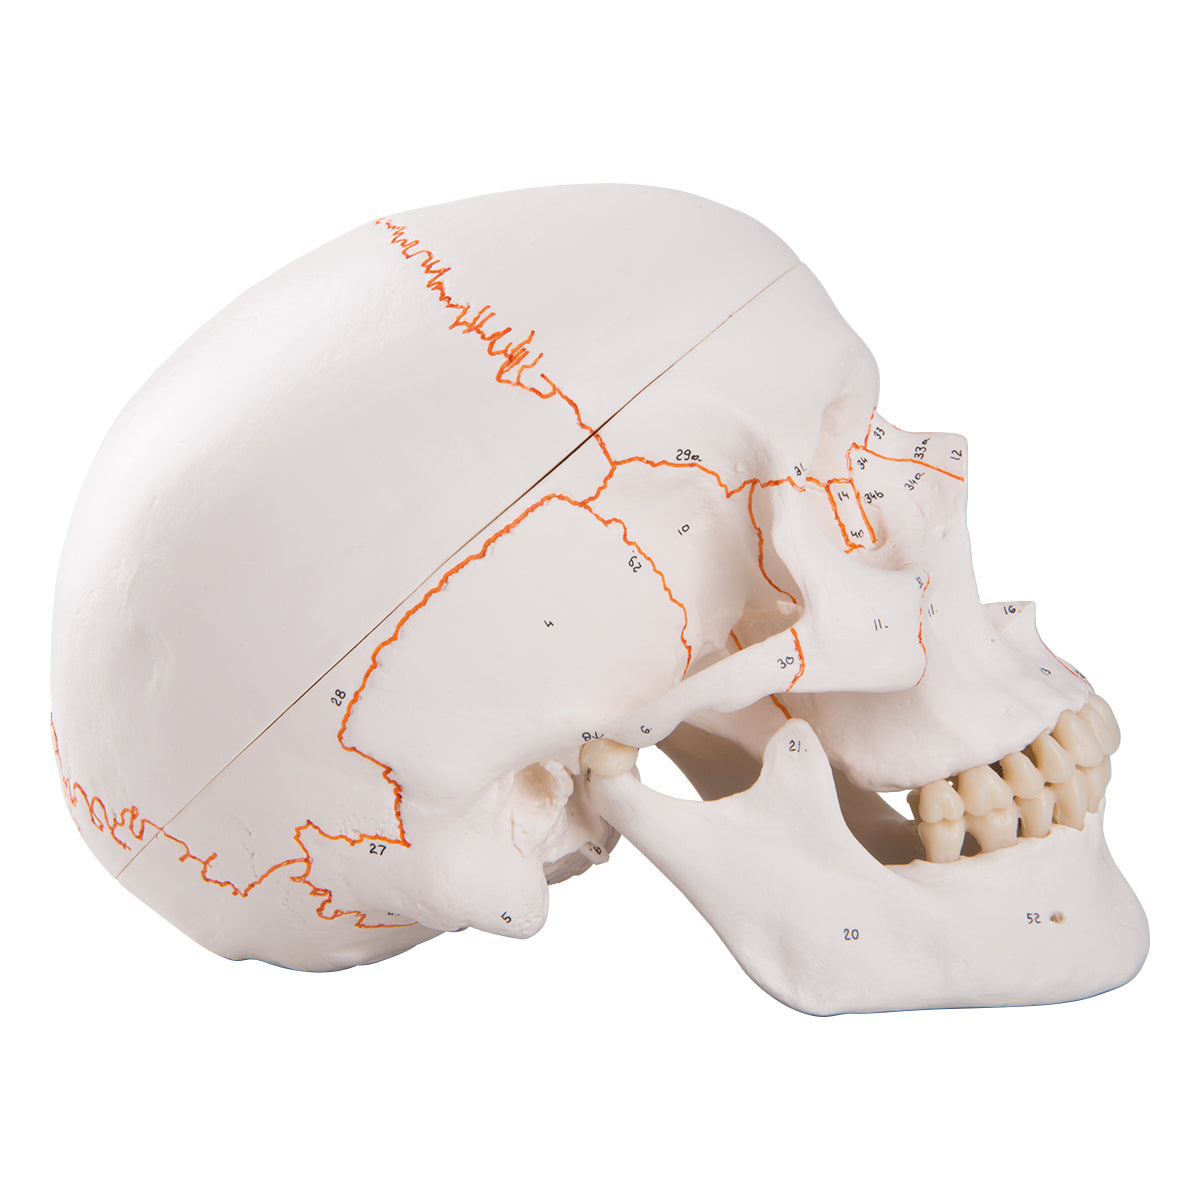 A22 Classic Human Skull Model with Opened Lower Jaw, 3 part - 3B Smart Anatomy